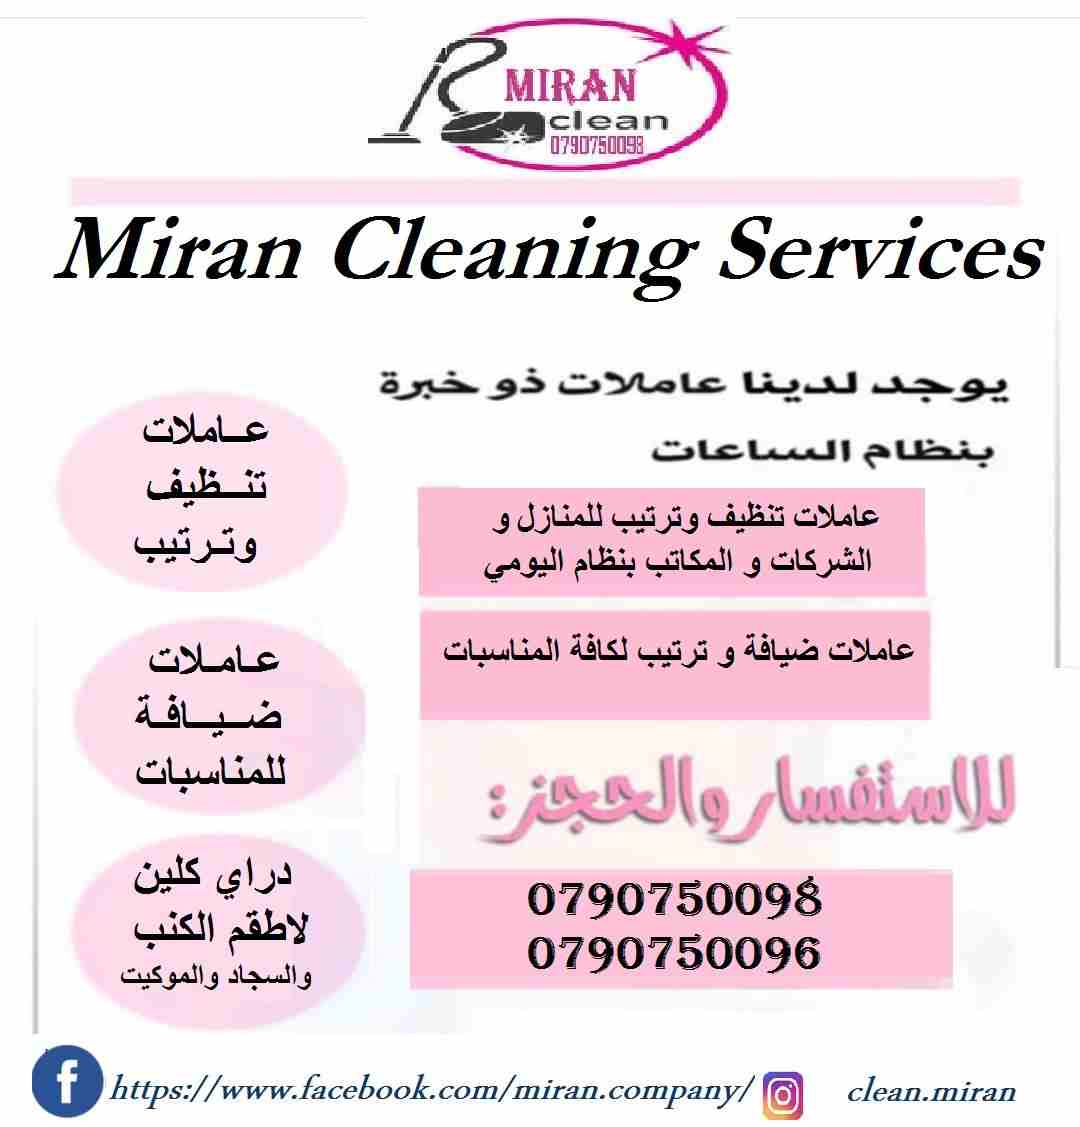 We provide Air Conditioning and General Maintenance Services for Villas, Offices, Shops & Flats at cheap cost. Call / WhatsApp at 055-5269352 / 050-5737068W-  مؤسسة ميران للتنظيف...